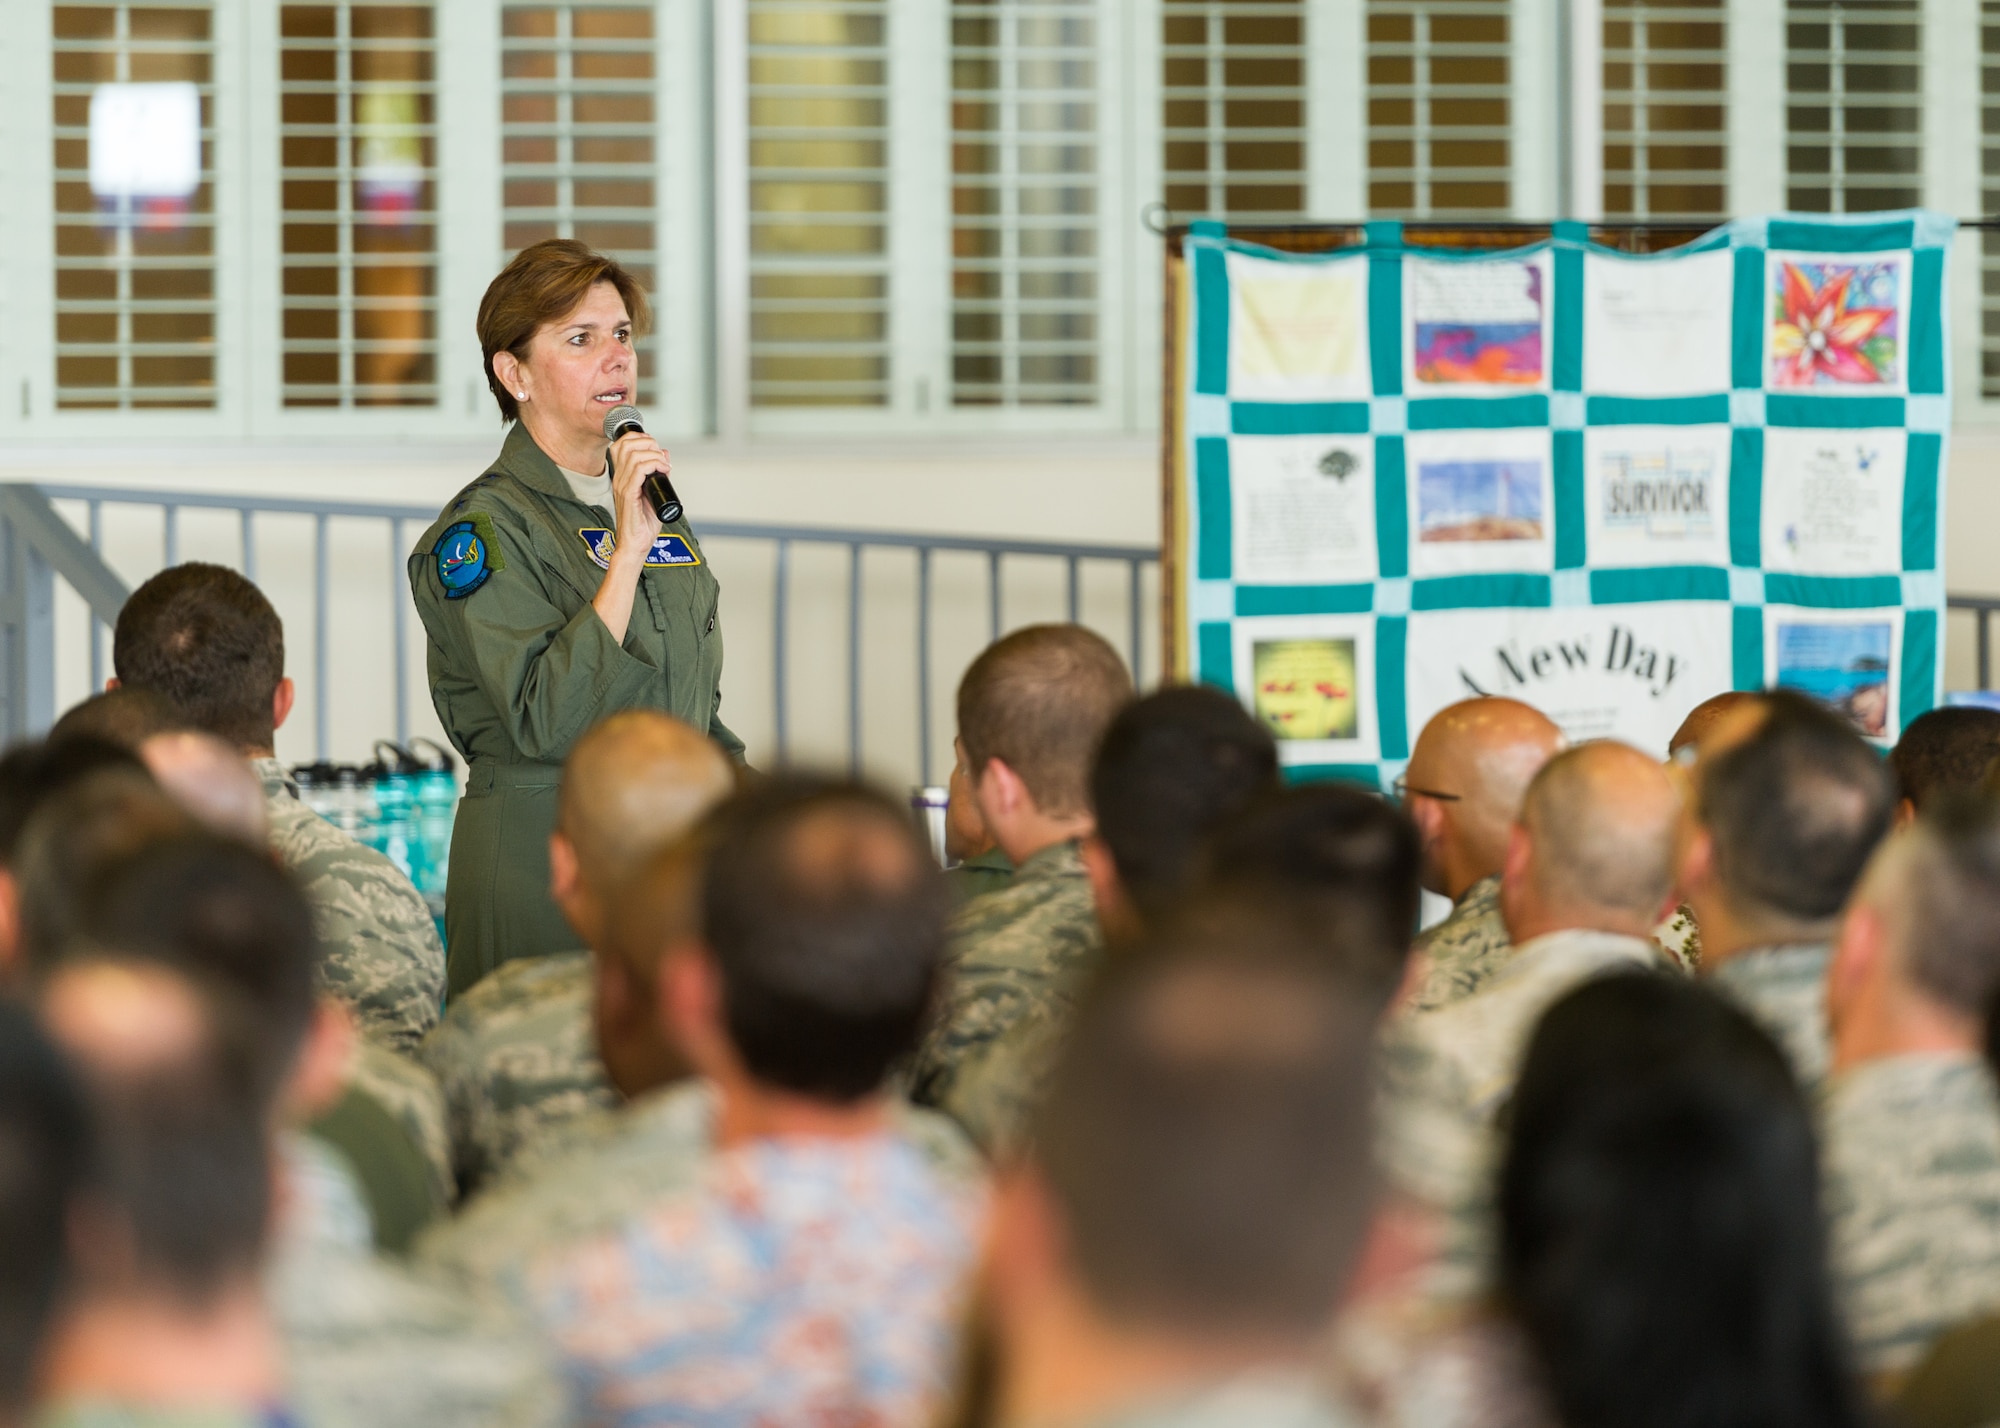 U.S. Air Force Gen. Lori J. Robinson, Pacific Air Forces commander, gives her opening comments prior to PACAF's Sexual Assault Prevention and Response training day, Joint Base Pearl Harbor-Hickam, Apr. 28, 2015.  The training is an annual training requirement for all Airmen and addressed a number of topics ranging from defining sexual harrassment to  eliminating sexual assault in the Air Force through professional, respectful behavior.     (U.S. Air Force photo by Tech. Sgt. James Stewart/Released)(U.S. Air Force photo by Tech. Sgt. James Stewart/Released)